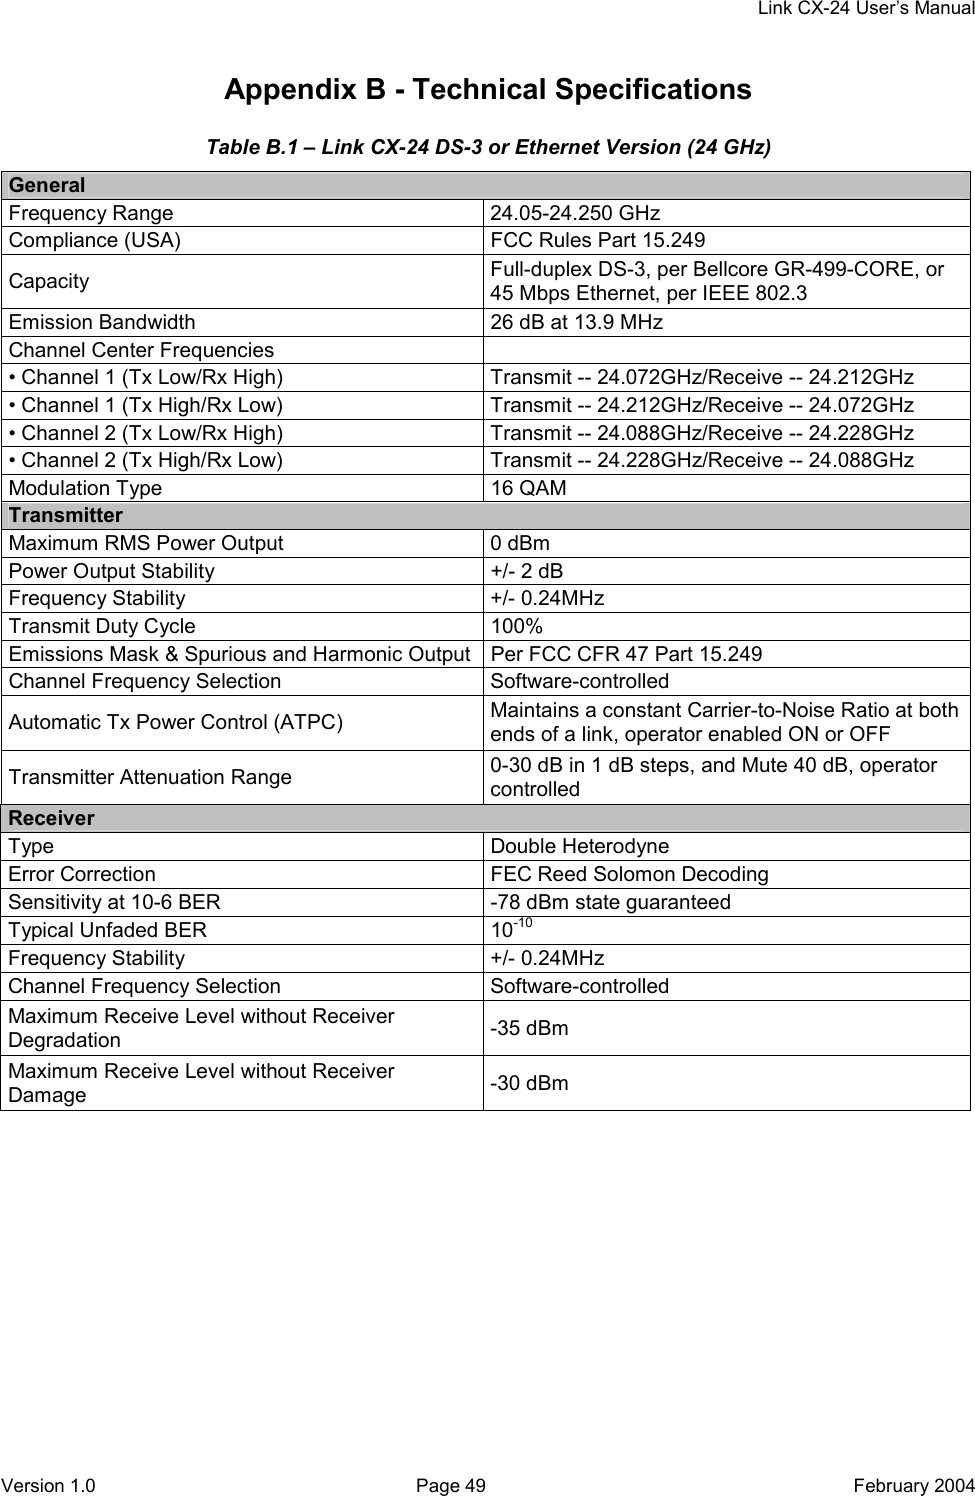     Link CX-24 User’s Manual Version 1.0  Page 49  February 2004 Appendix B - Technical Specifications Table B.1 – Link CX-24 DS-3 or Ethernet Version (24 GHz) General Frequency Range  24.05-24.250 GHz Compliance (USA)  FCC Rules Part 15.249 Capacity  Full-duplex DS-3, per Bellcore GR-499-CORE, or 45 Mbps Ethernet, per IEEE 802.3 Emission Bandwidth  26 dB at 13.9 MHz Channel Center Frequencies   • Channel 1 (Tx Low/Rx High)  Transmit -- 24.072GHz/Receive -- 24.212GHz • Channel 1 (Tx High/Rx Low)  Transmit -- 24.212GHz/Receive -- 24.072GHz • Channel 2 (Tx Low/Rx High)  Transmit -- 24.088GHz/Receive -- 24.228GHz • Channel 2 (Tx High/Rx Low)  Transmit -- 24.228GHz/Receive -- 24.088GHz Modulation Type  16 QAM Transmitter Maximum RMS Power Output  0 dBm Power Output Stability  +/- 2 dB Frequency Stability  +/- 0.24MHz Transmit Duty Cycle  100% Emissions Mask &amp; Spurious and Harmonic Output  Per FCC CFR 47 Part 15.249 Channel Frequency Selection  Software-controlled Automatic Tx Power Control (ATPC)  Maintains a constant Carrier-to-Noise Ratio at both ends of a link, operator enabled ON or OFF Transmitter Attenuation Range  0-30 dB in 1 dB steps, and Mute 40 dB, operator controlled Receiver Type Double Heterodyne Error Correction  FEC Reed Solomon Decoding Sensitivity at 10-6 BER  -78 dBm state guaranteed Typical Unfaded BER  10-10 Frequency Stability  +/- 0.24MHz Channel Frequency Selection  Software-controlled Maximum Receive Level without Receiver Degradation  -35 dBm Maximum Receive Level without Receiver Damage  -30 dBm  